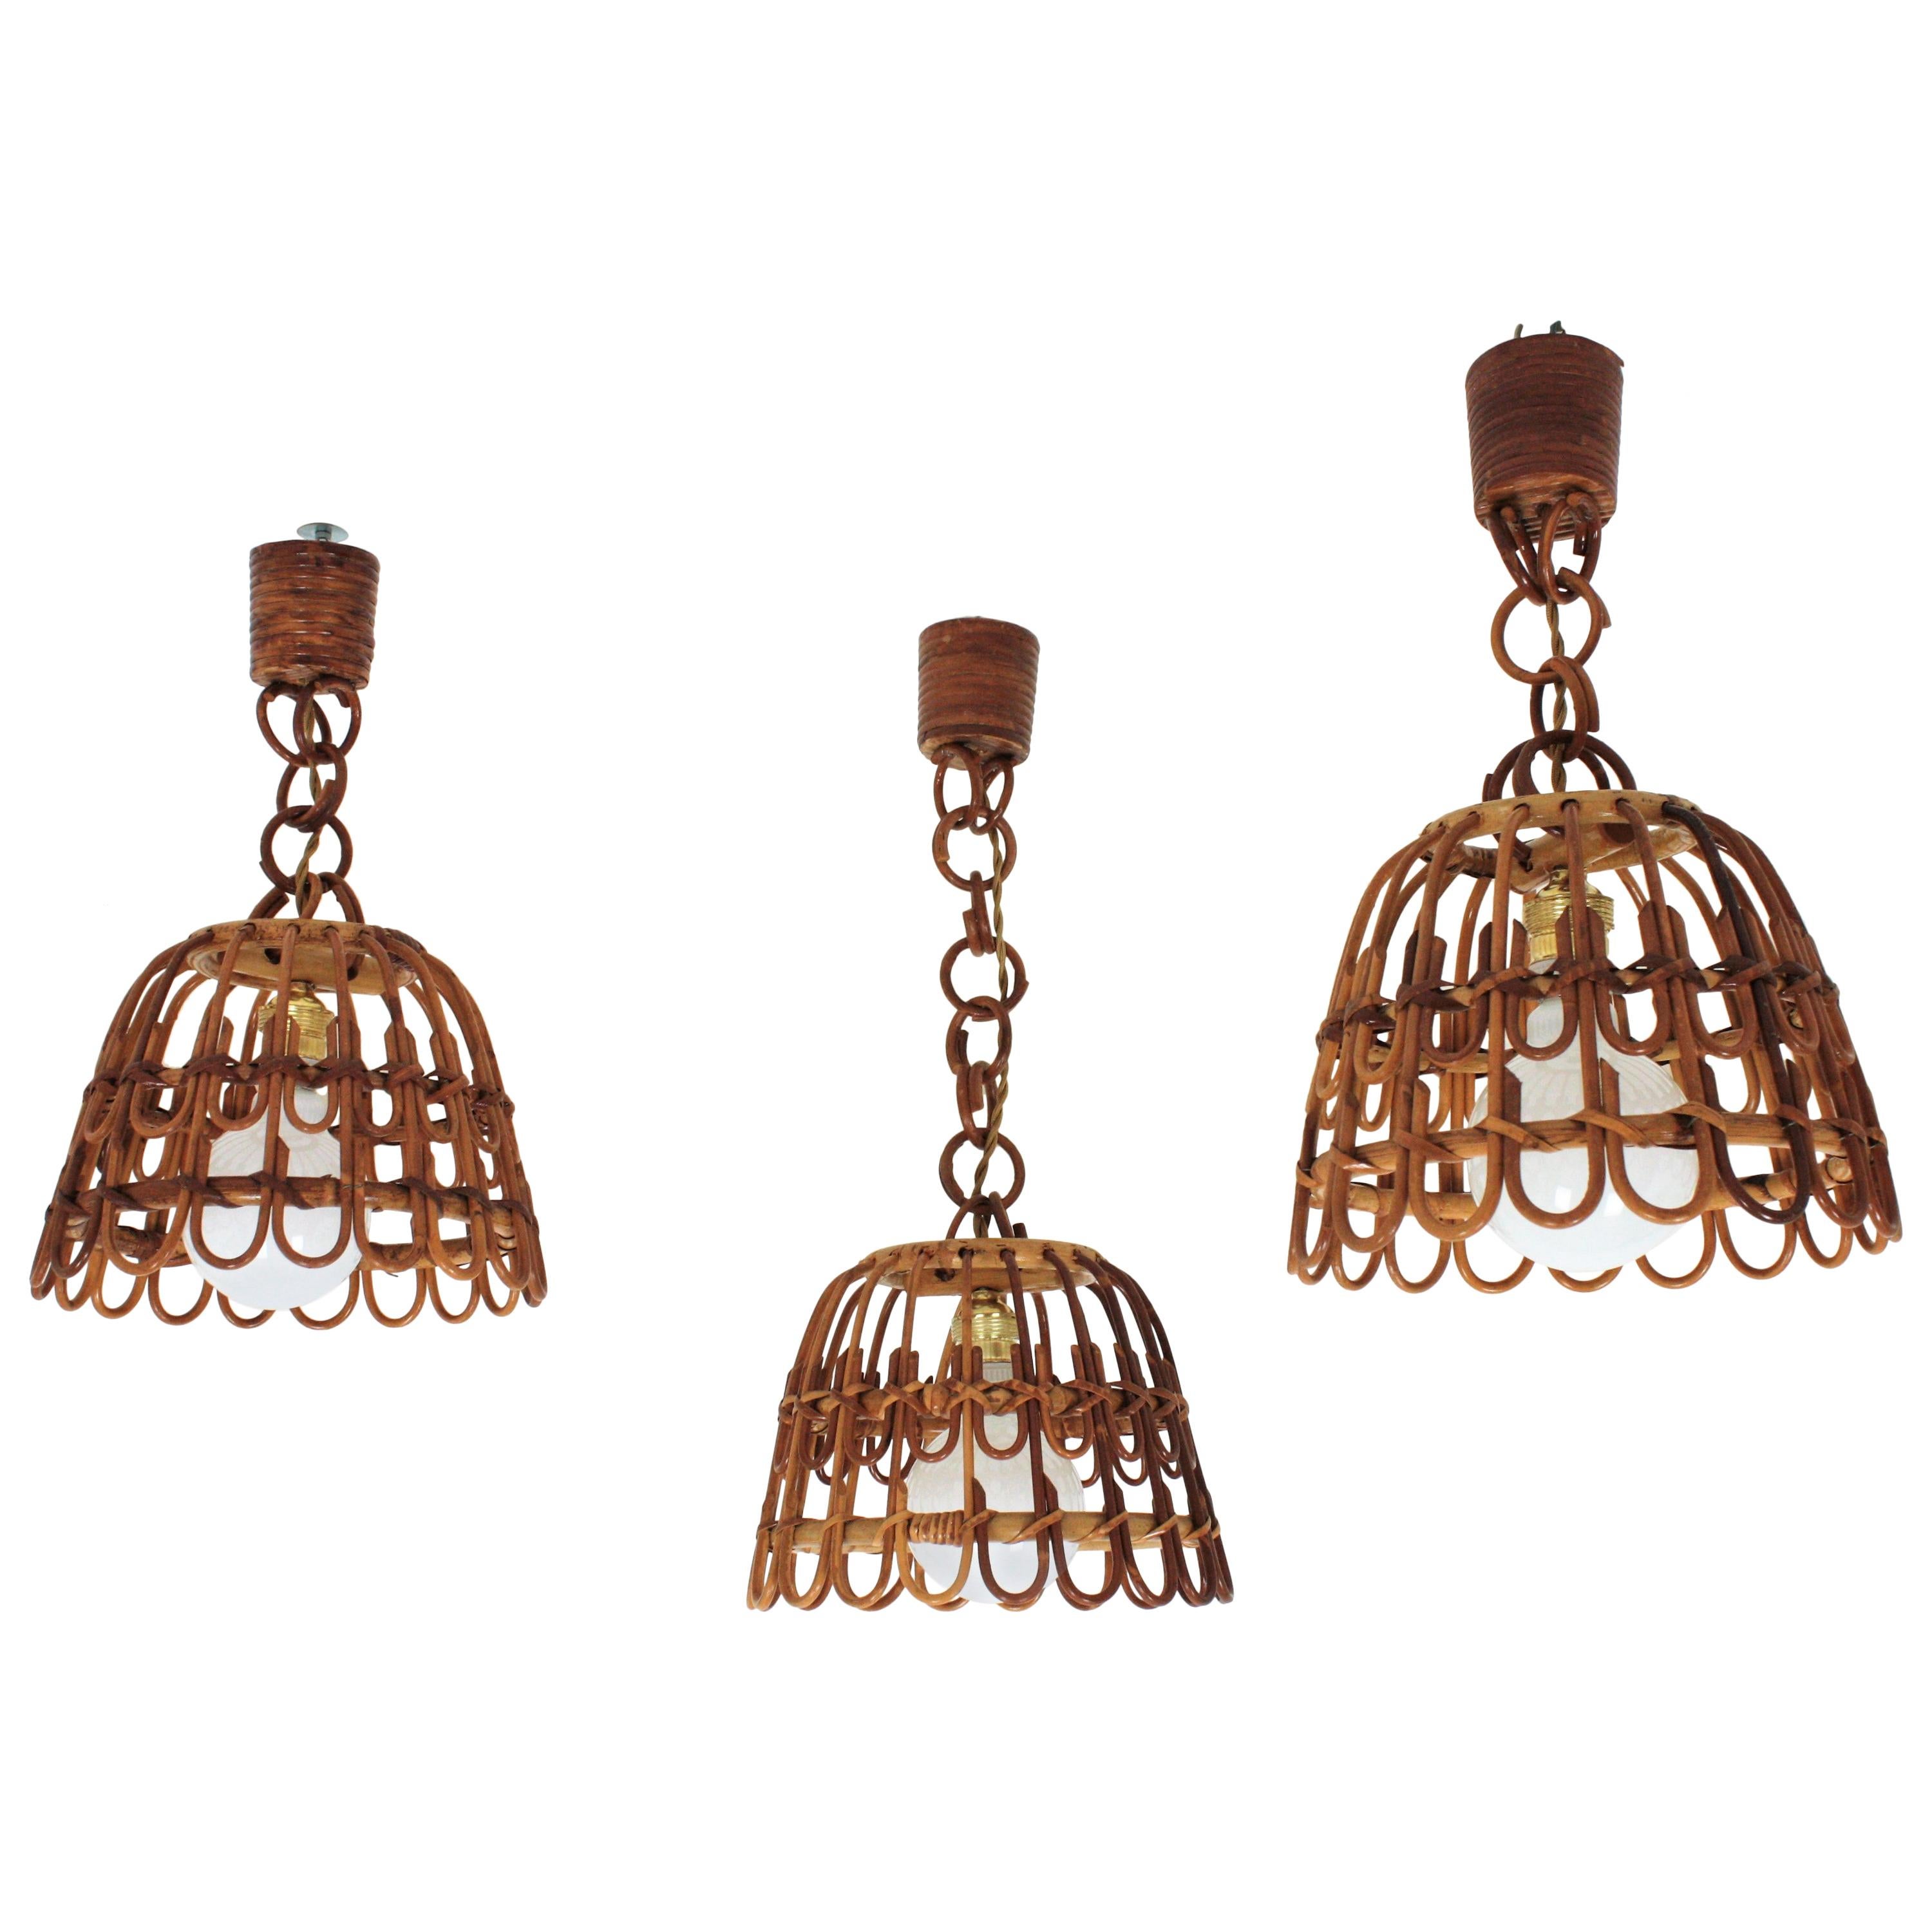 Rattan Bell Pendant Lights or Hanging Lamps, Set of Three